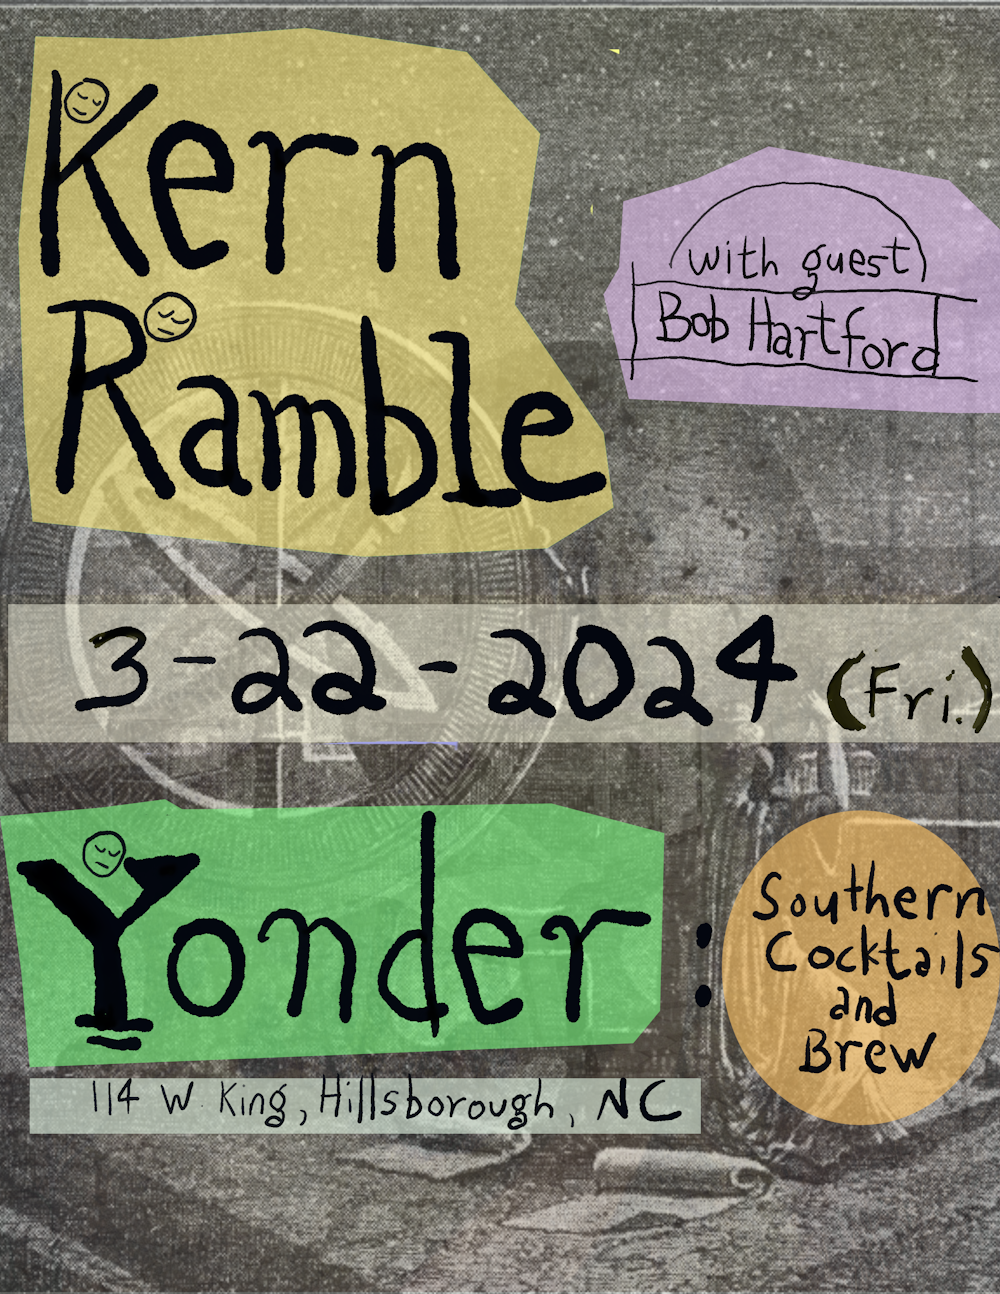 Kern Ramble flyer for 3-22 show